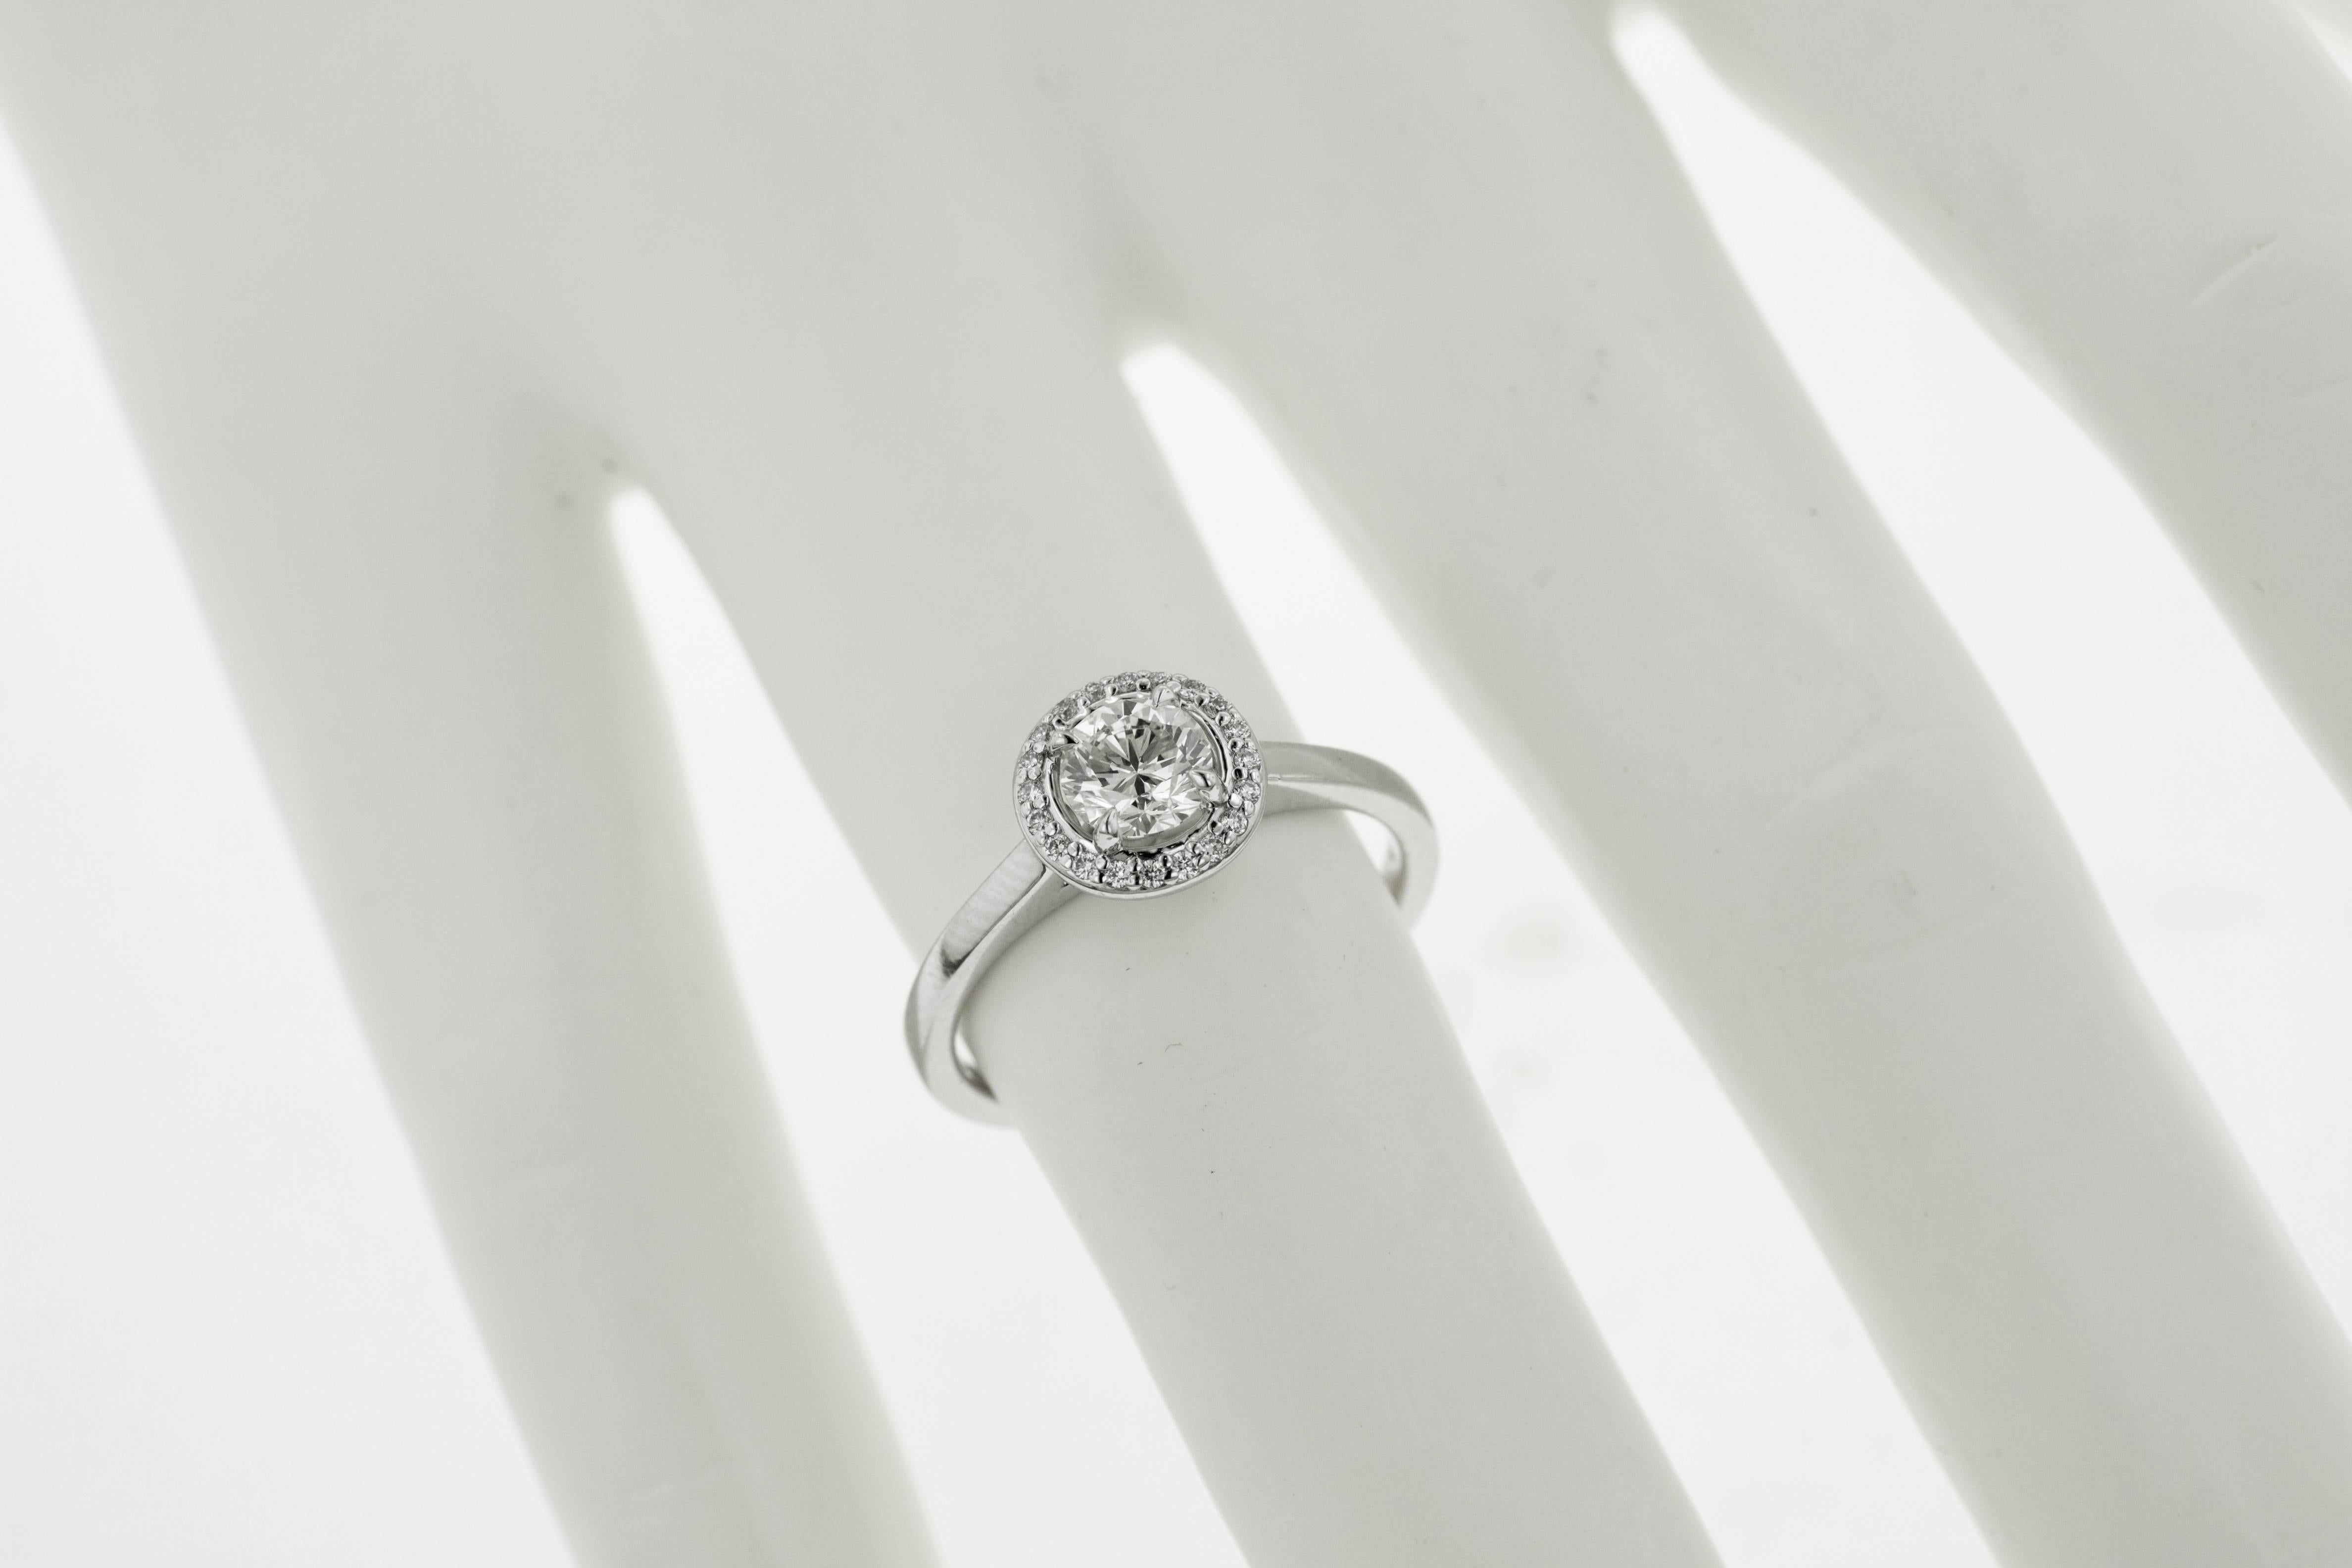 Exclusive brand new engagement ring with a natural .63ct diamond center stone, encircled by a sparkling halo of .10ct diamonds. The ring is a size 7 and is complimentary resized by us for a perfect fit.

✓ Jewelry report included 
✓ Tears Undressed